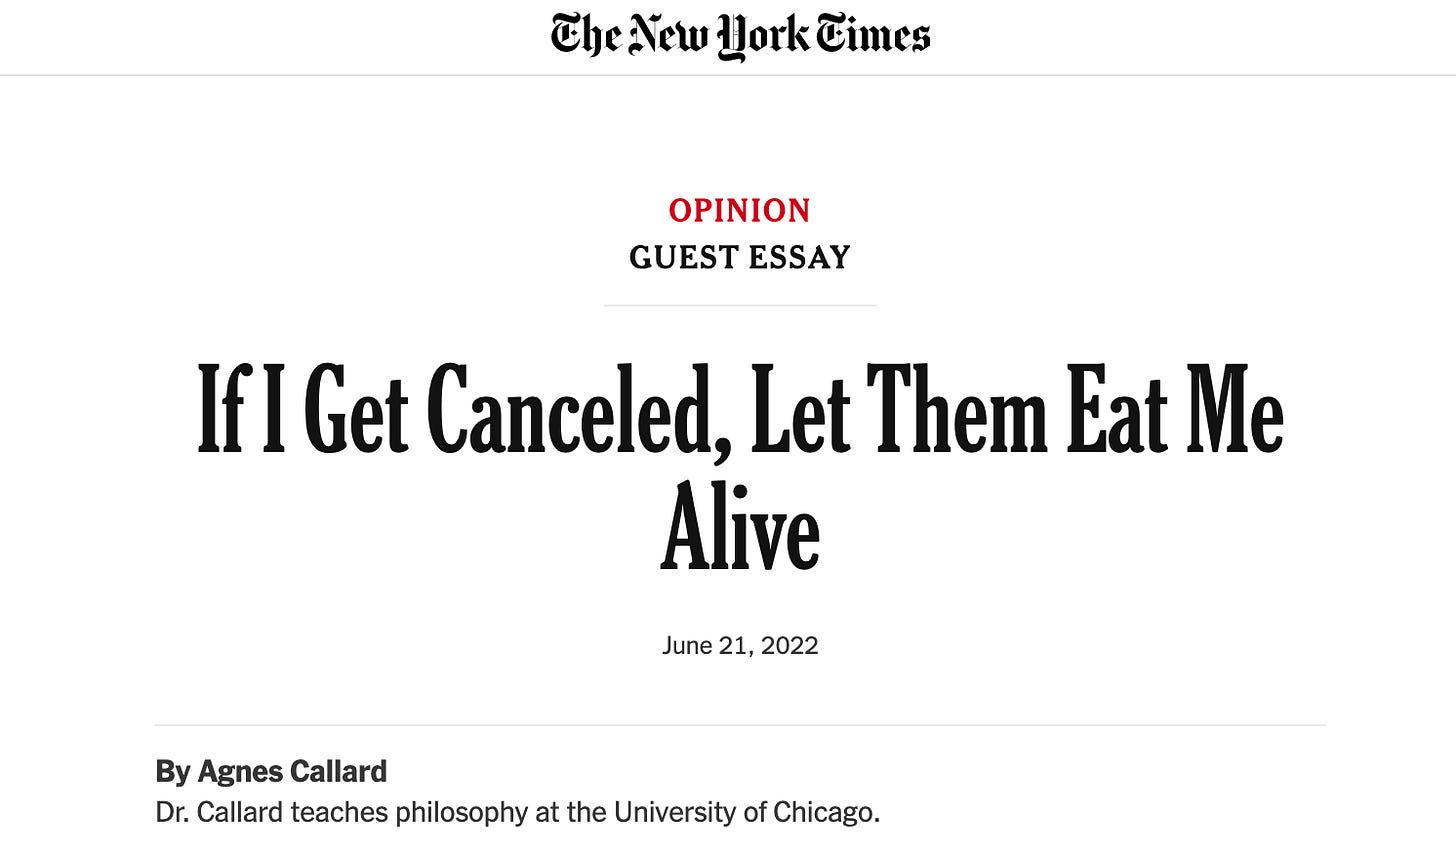 NYT Guest Essay screenshot: “If I Get Canceled, Let Them Eat Me Alive” by Agnes Callard, from June 21, 2022.